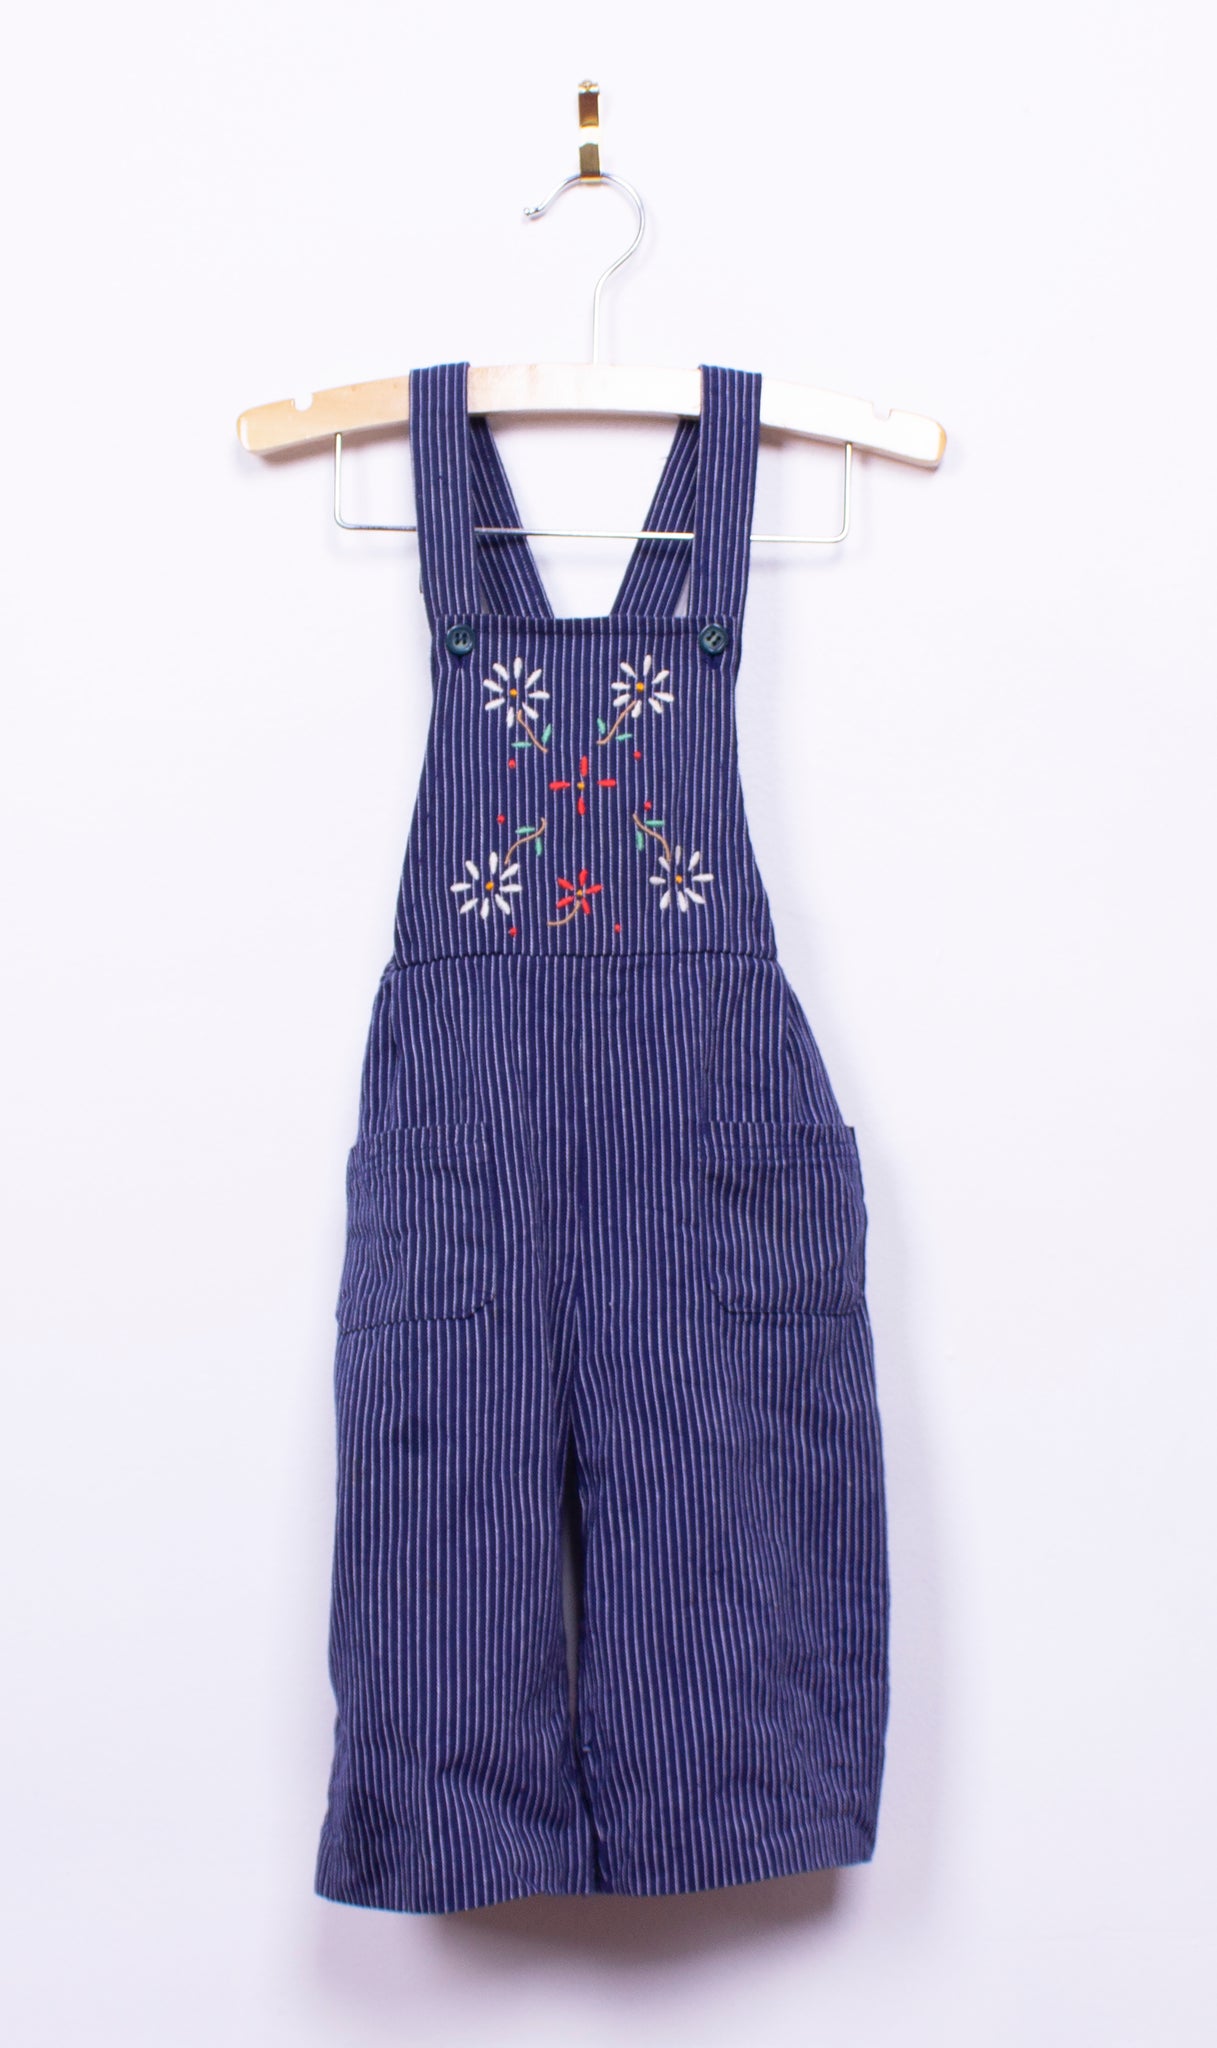 Floral Embroidered Pinstripe Overalls